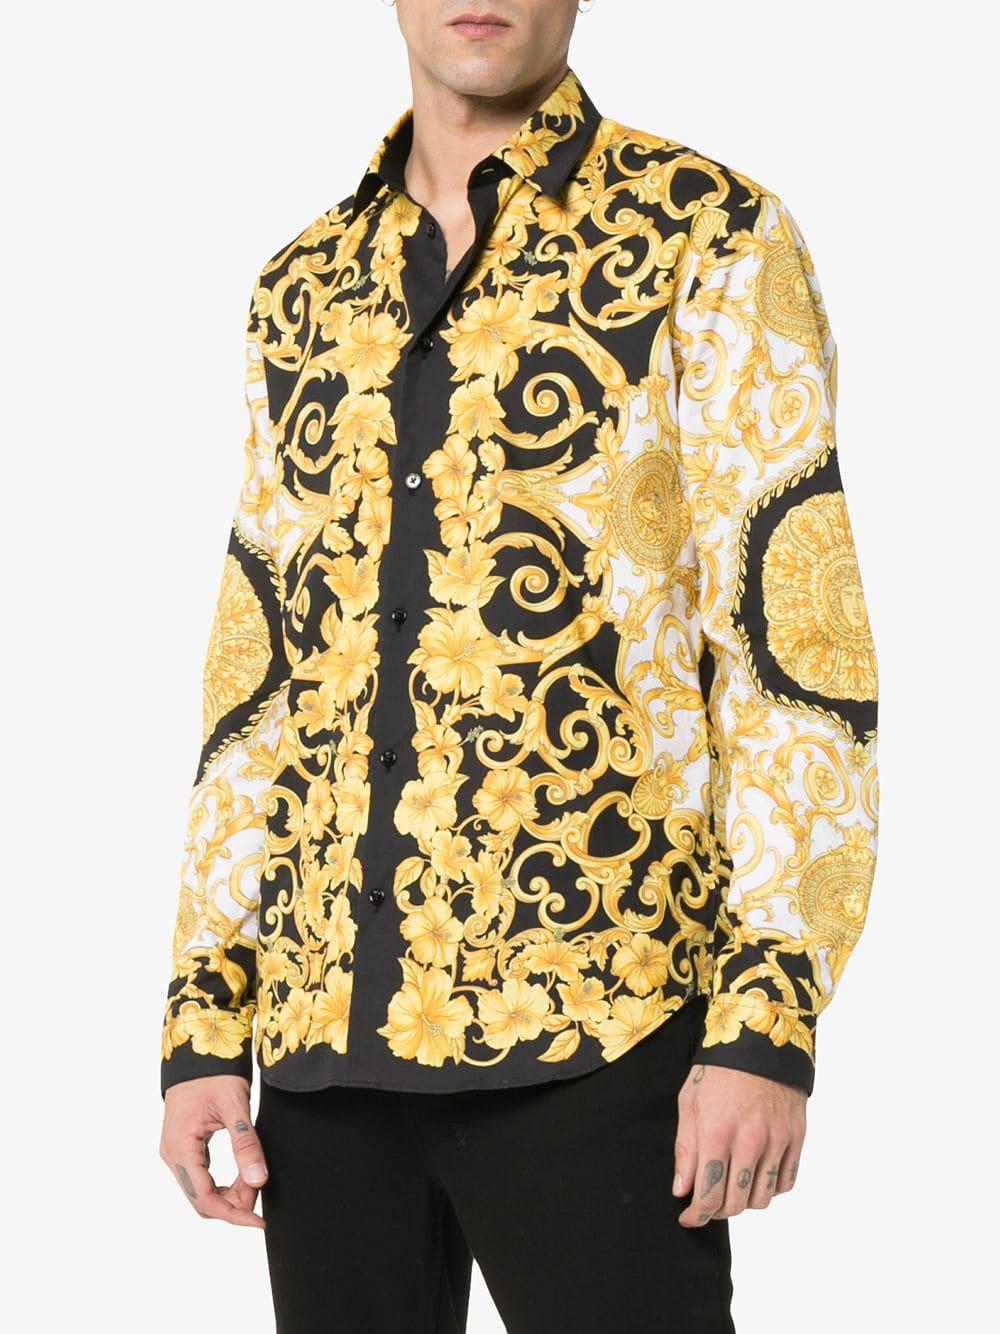 Versace Baroque Print Cotton Shirt in Yellow for Men - Lyst